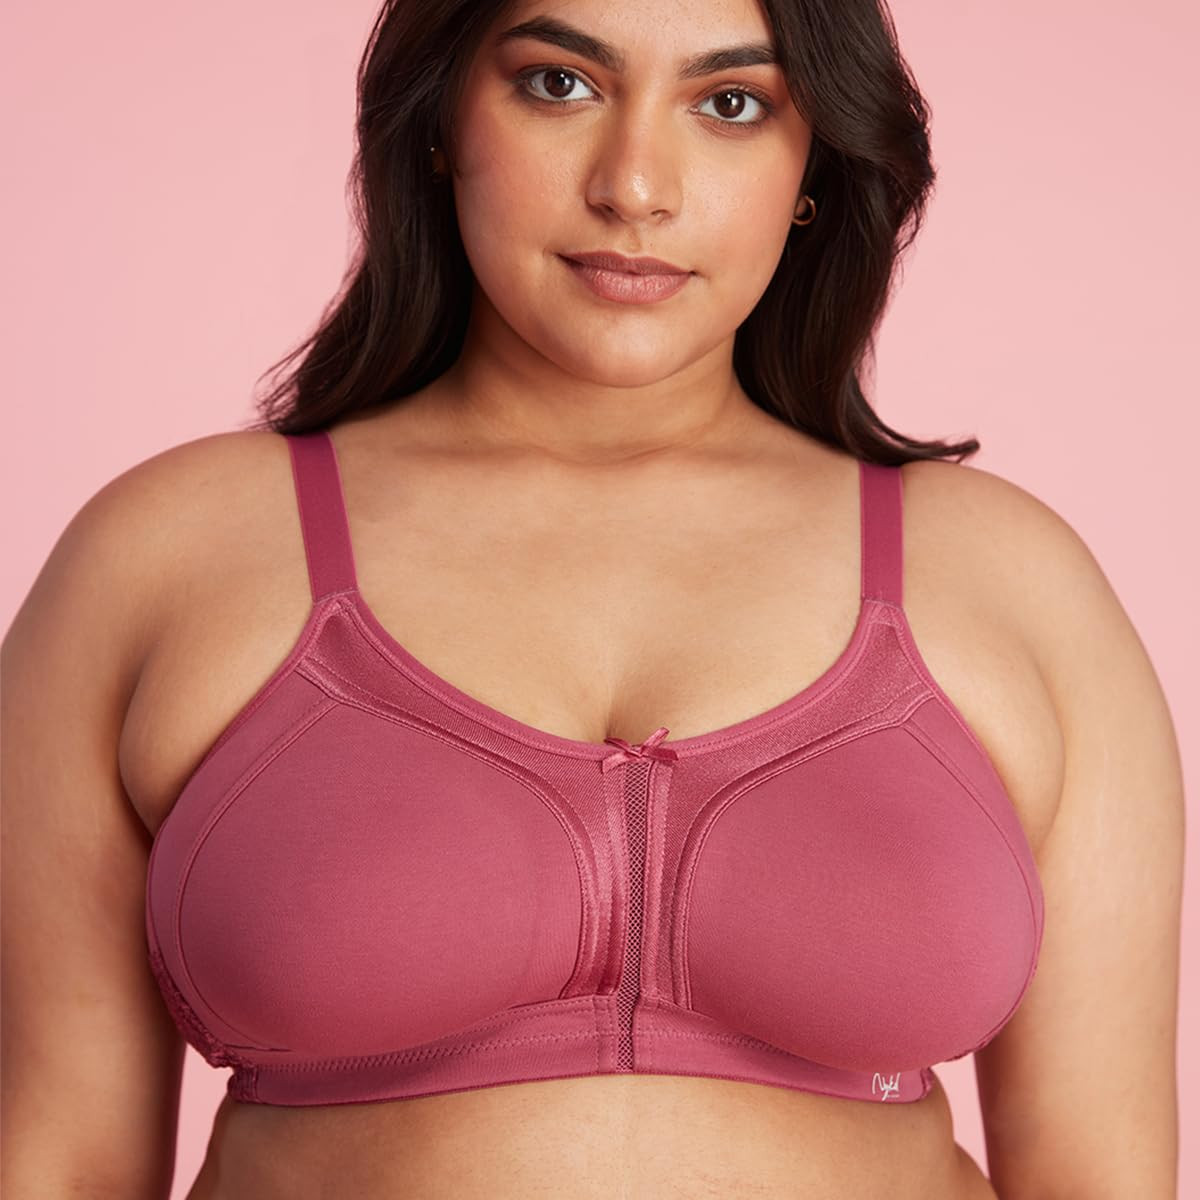 Women's Cotton Wide Strap Bra For Daily use at Rs 62/piece, New Mustafabad, New Delhi